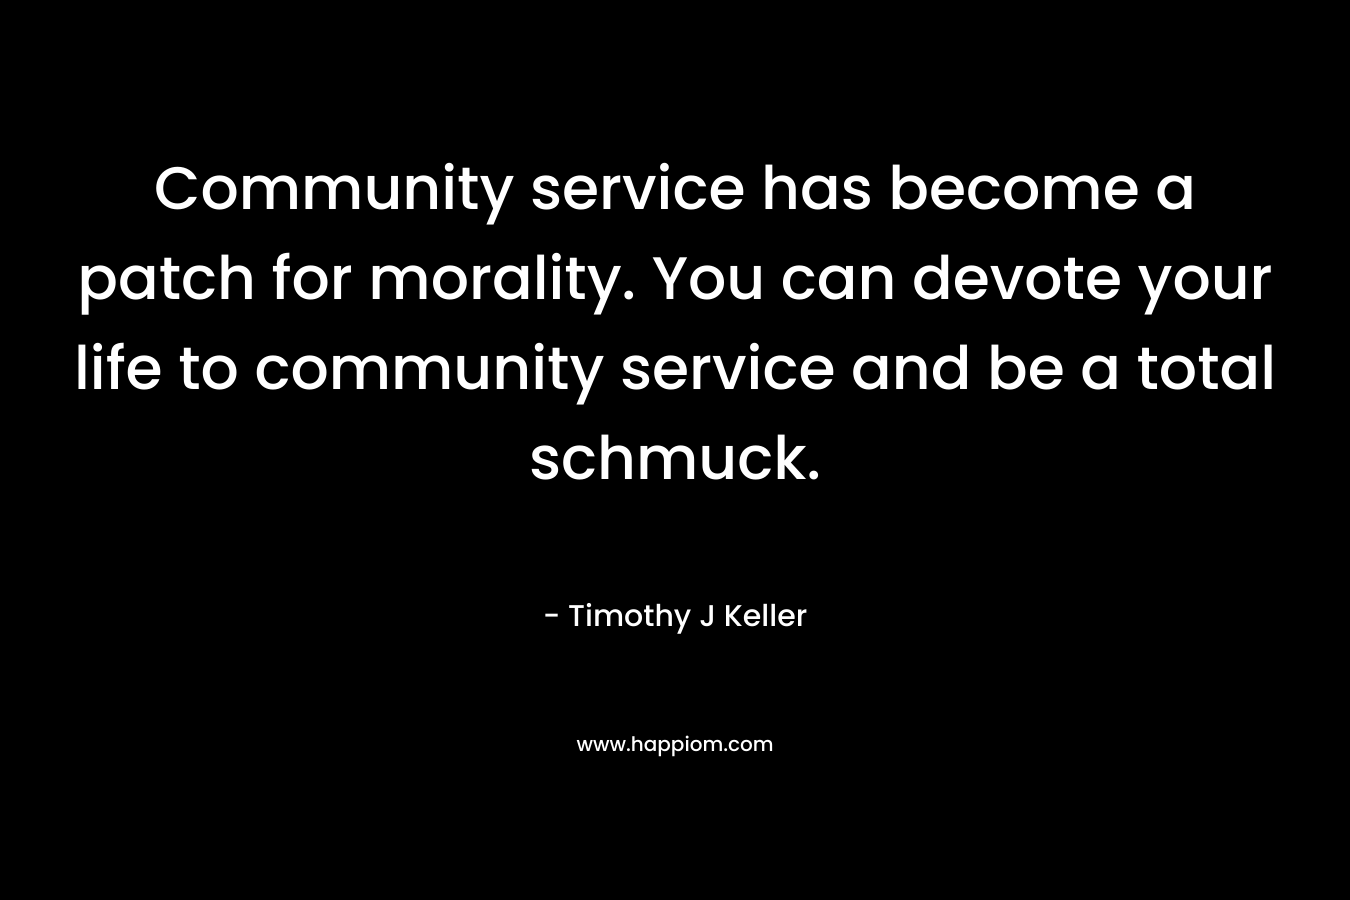 Community service has become a patch for morality. You can devote your life to community service and be a total schmuck.